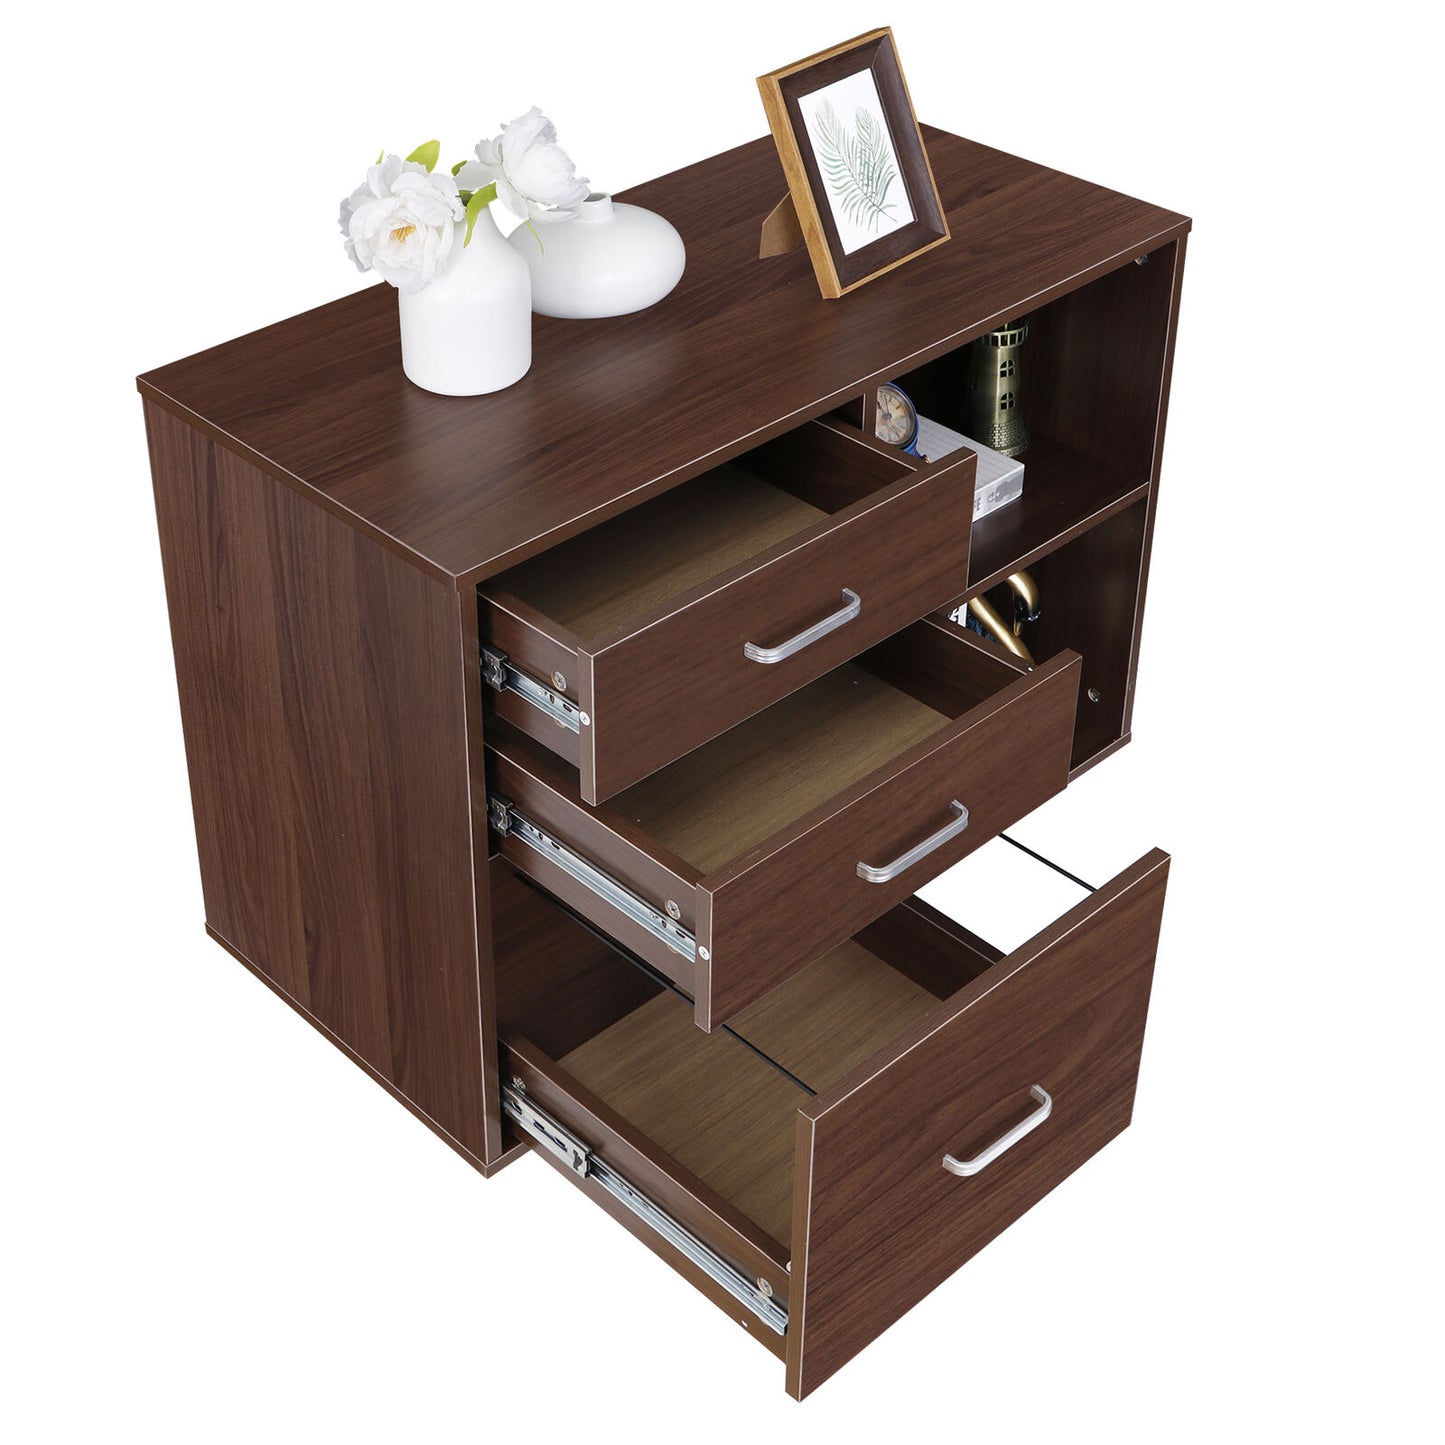 3 Drawers Mobile Wood File Cabinet Printer Stand with Open Storage Shelves Brown